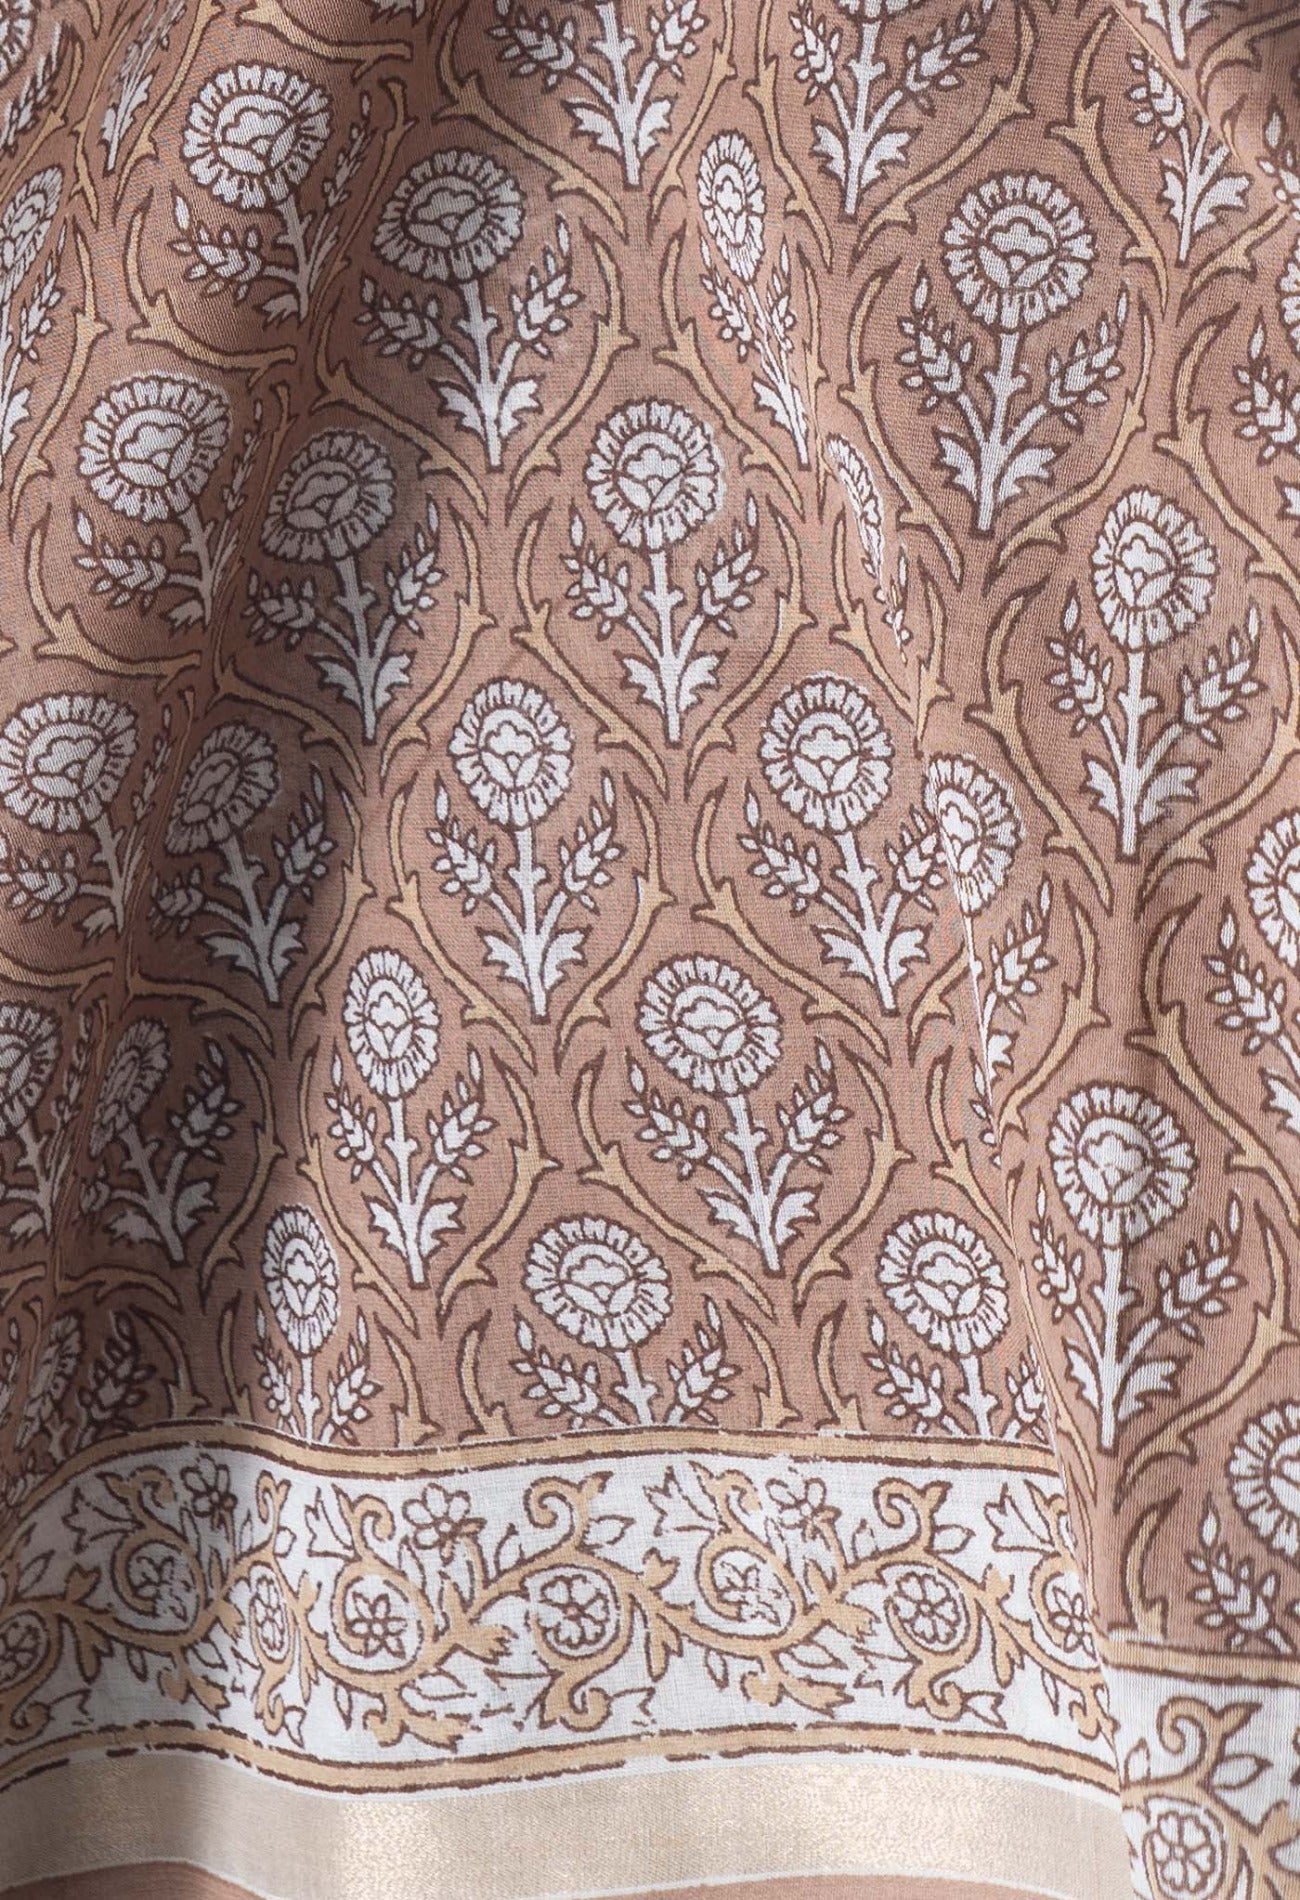 Online Shopping for Brown Skin Printed Chanderi Sico Saree with Fancy/Ethnic Prints from Madhya Pradesh at Unnatisilks.com India
